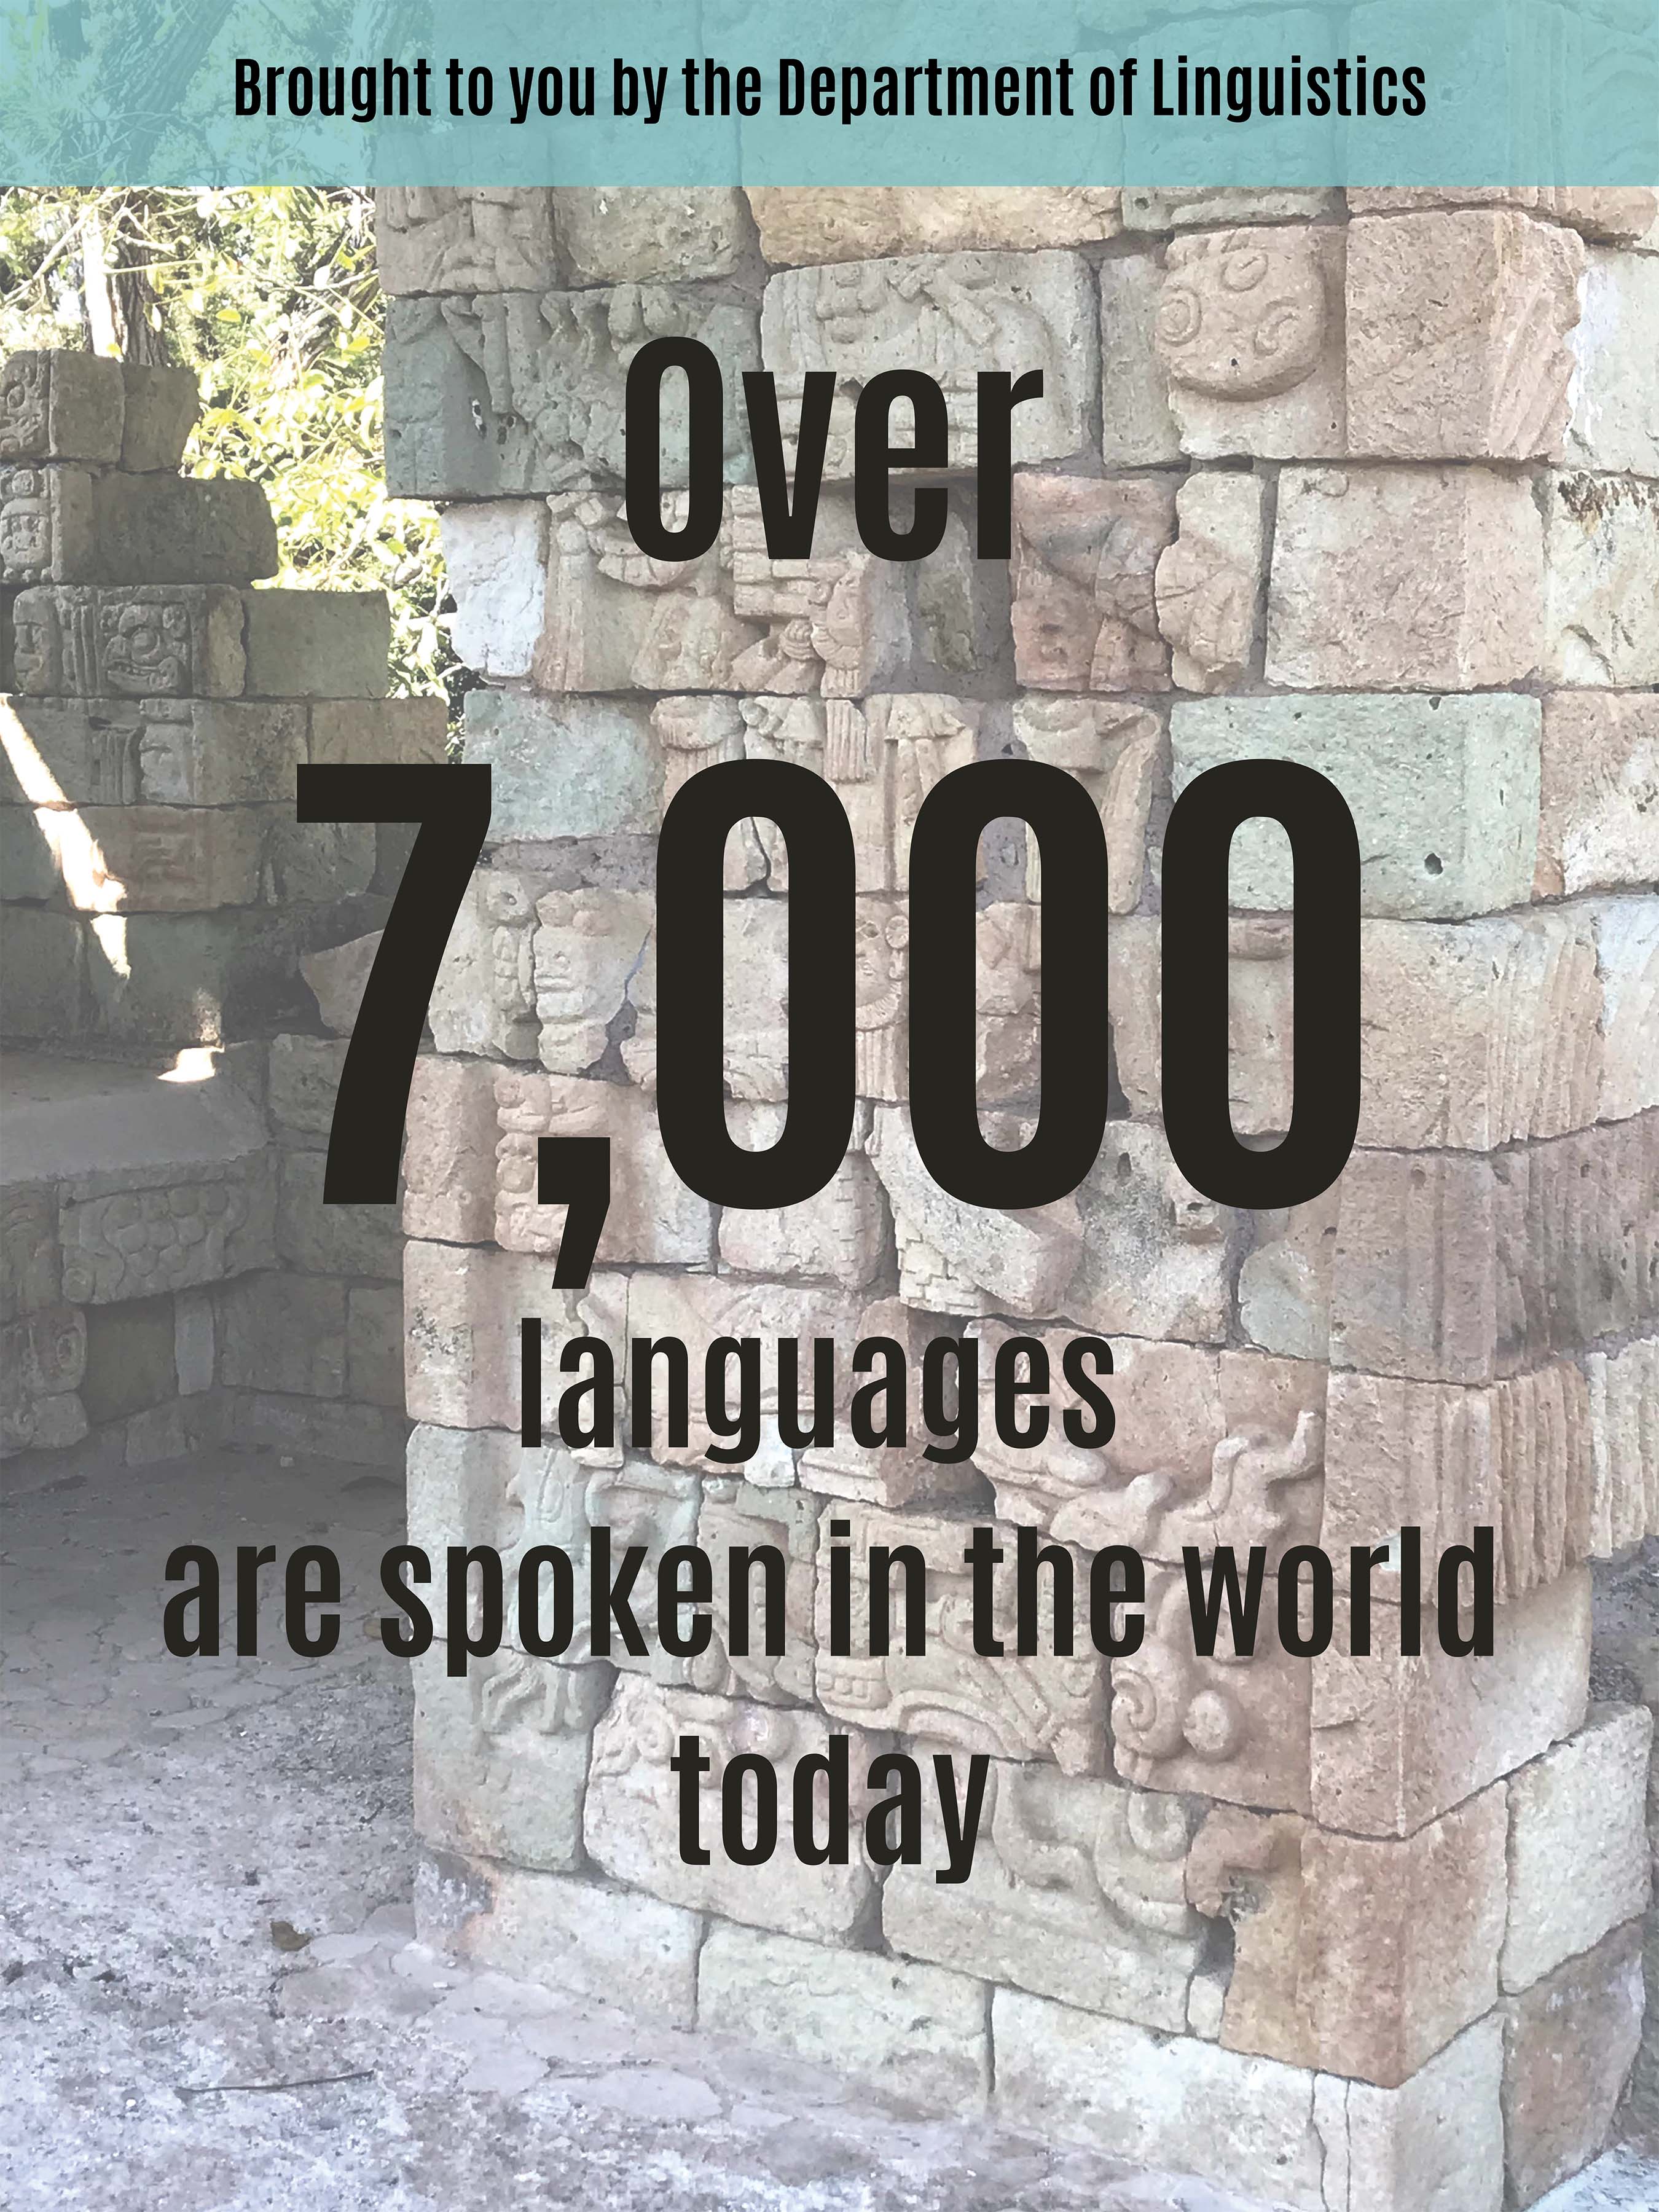 Over 7,000 languages are spoken in the world today.Brought to you by the Department of Linguistics.